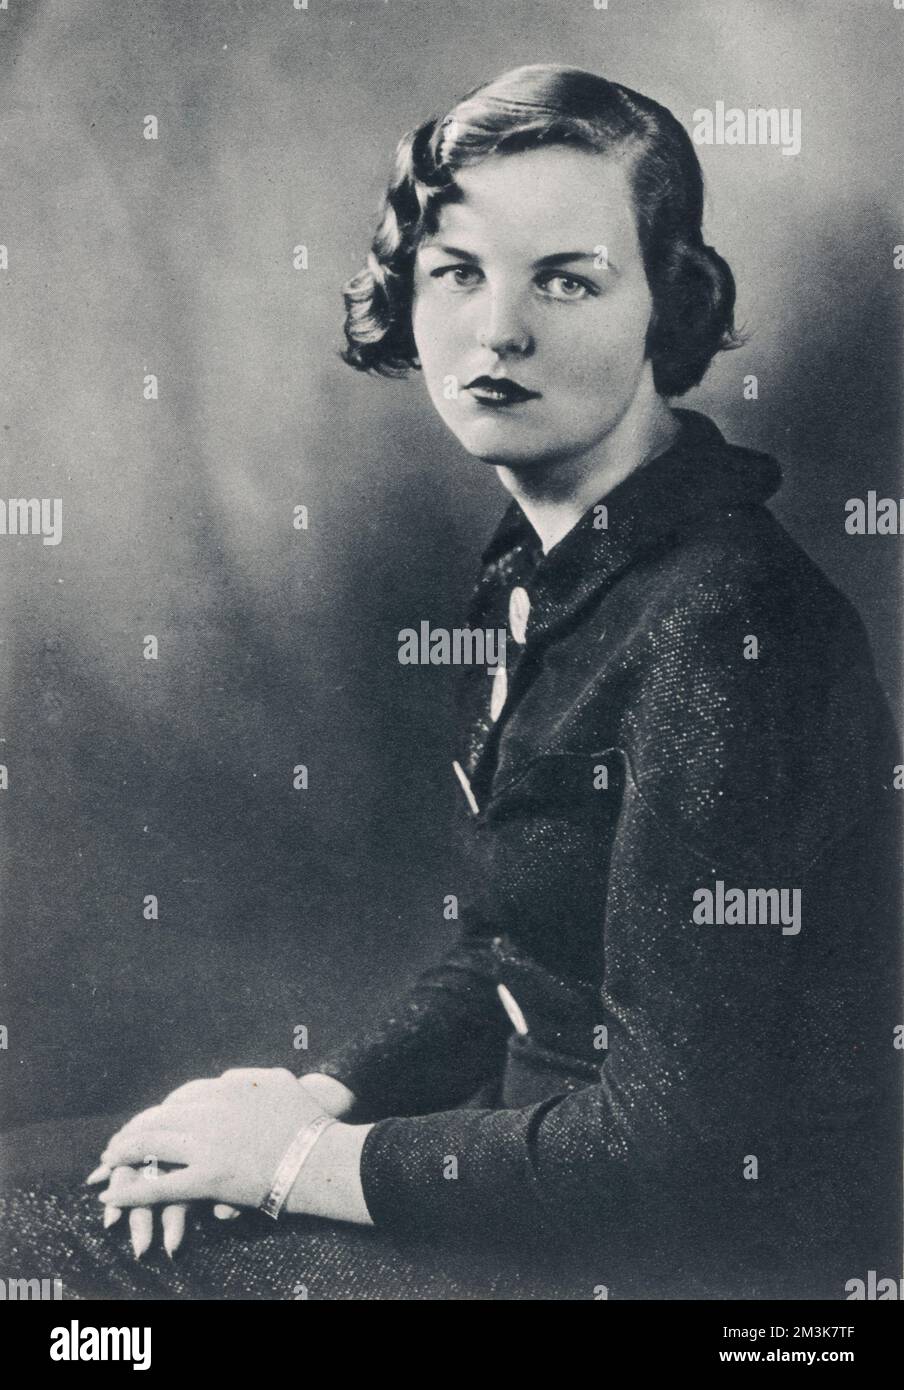 Photograph of Jessica Mitford, 5th daughter of Lord and Lady Redesdale.     When she was 19, Jessica Mitford eloped with Esmond Romilly, the nephew of Winston Churchill, to cover the Spanish Civil War. The couple emigrated to the USA in 1939. Esmond Romilly was killed in combat in 1941.     Jessica Mitford remained in America and through her interest in communism met American civil rights lawer Robert Edward Treuhaft, whom she married in 1943.  1937 Stock Photo